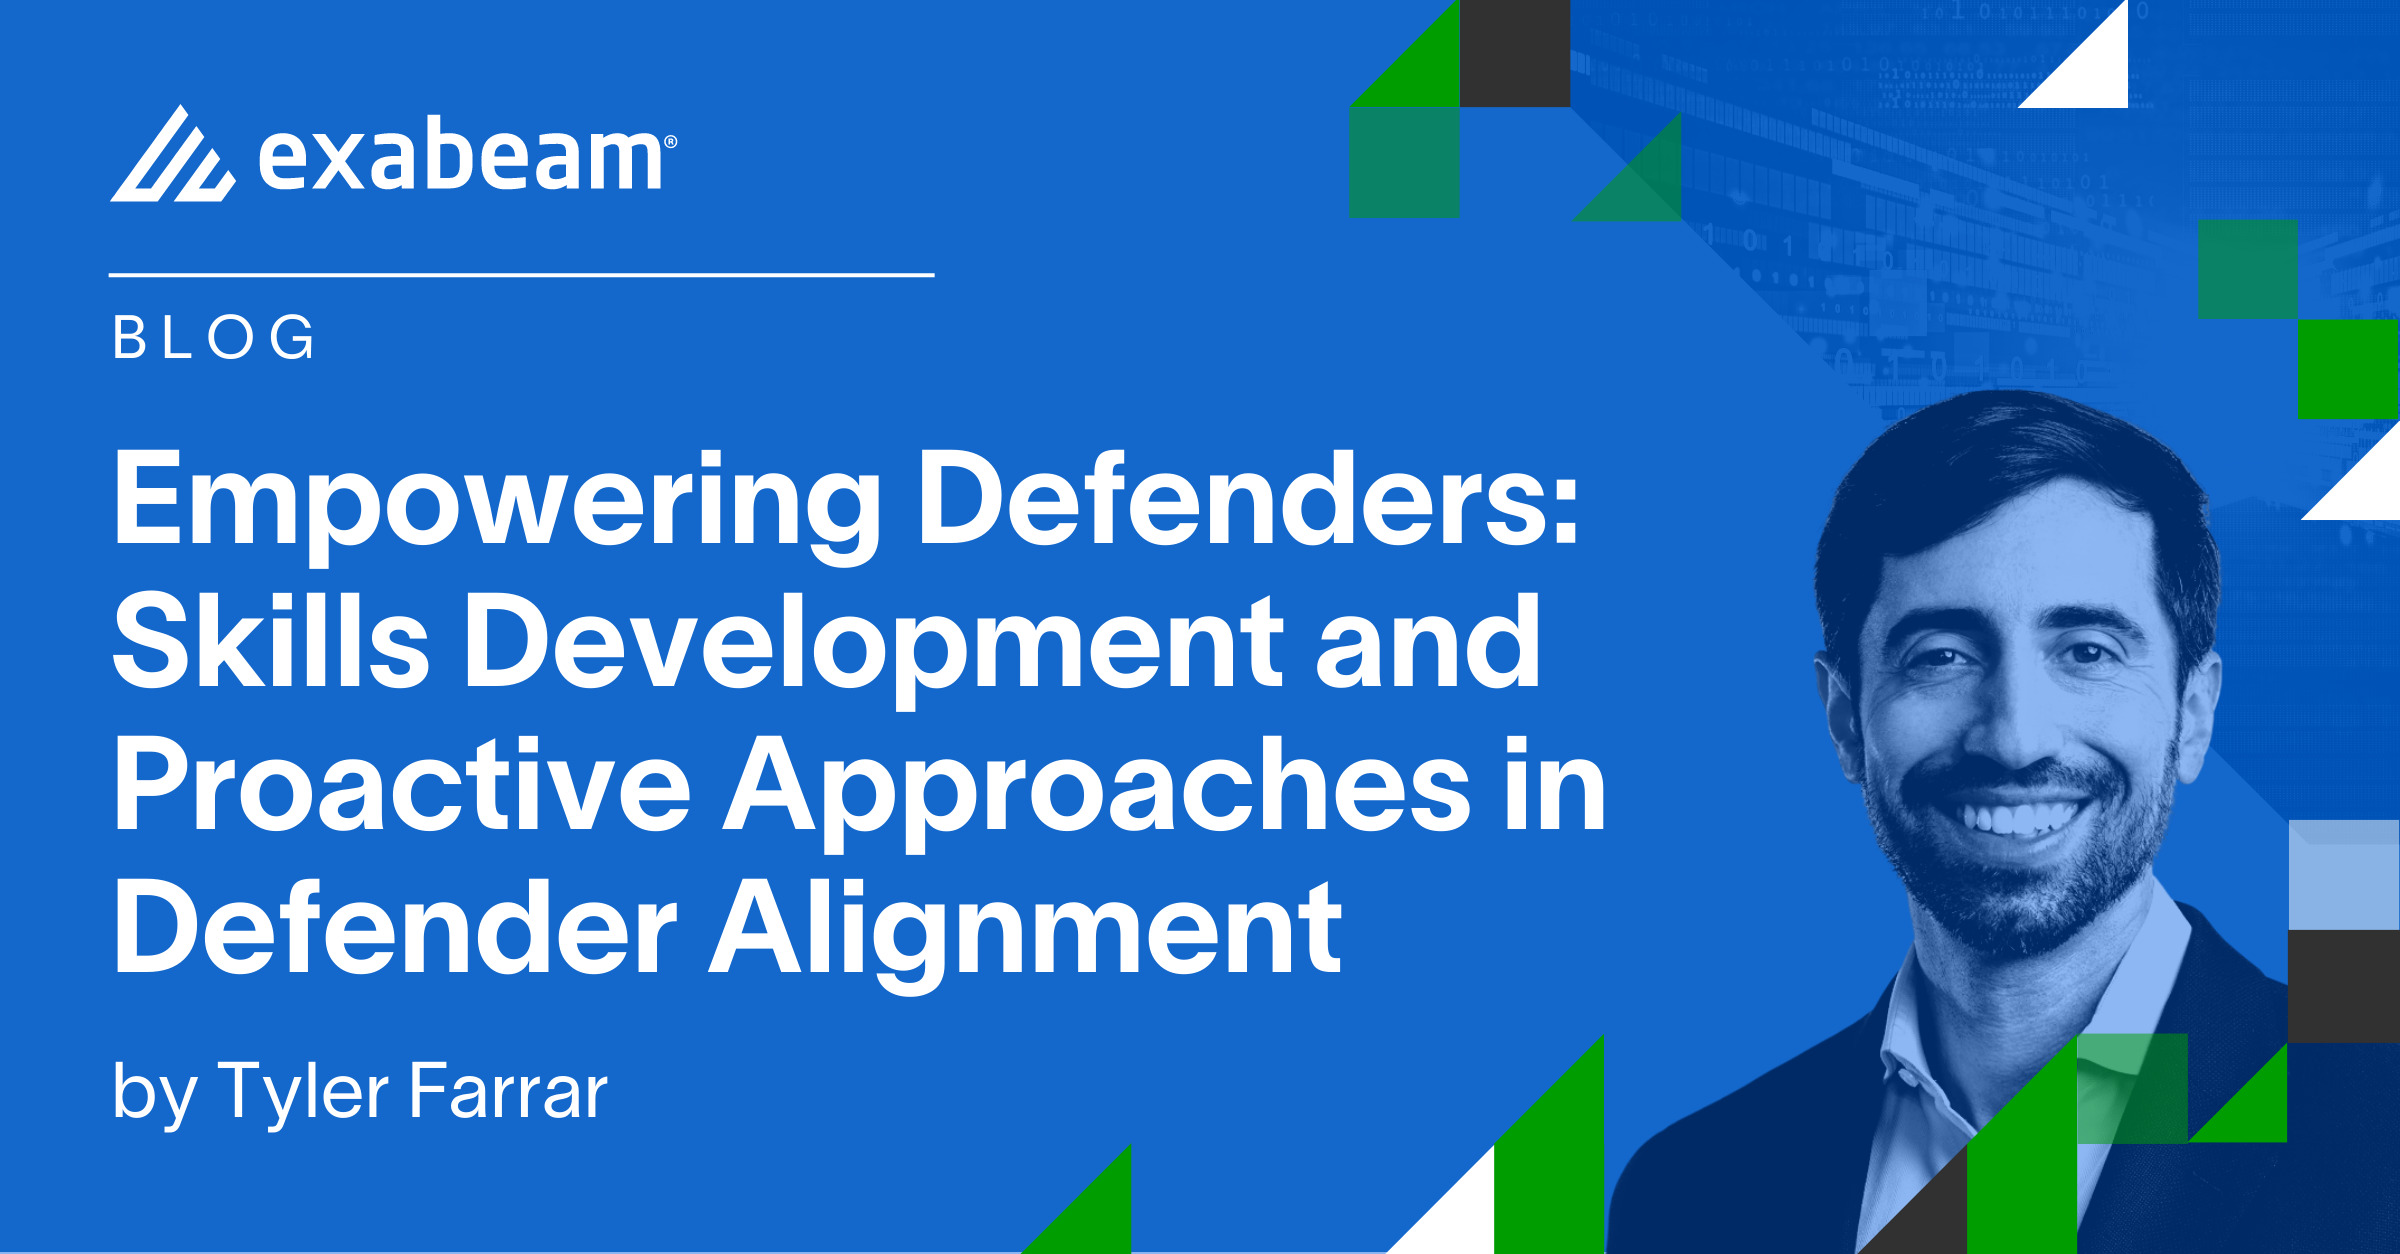 Empowering Defenders: Skills Development and Proactive Approaches in Defender Alignment